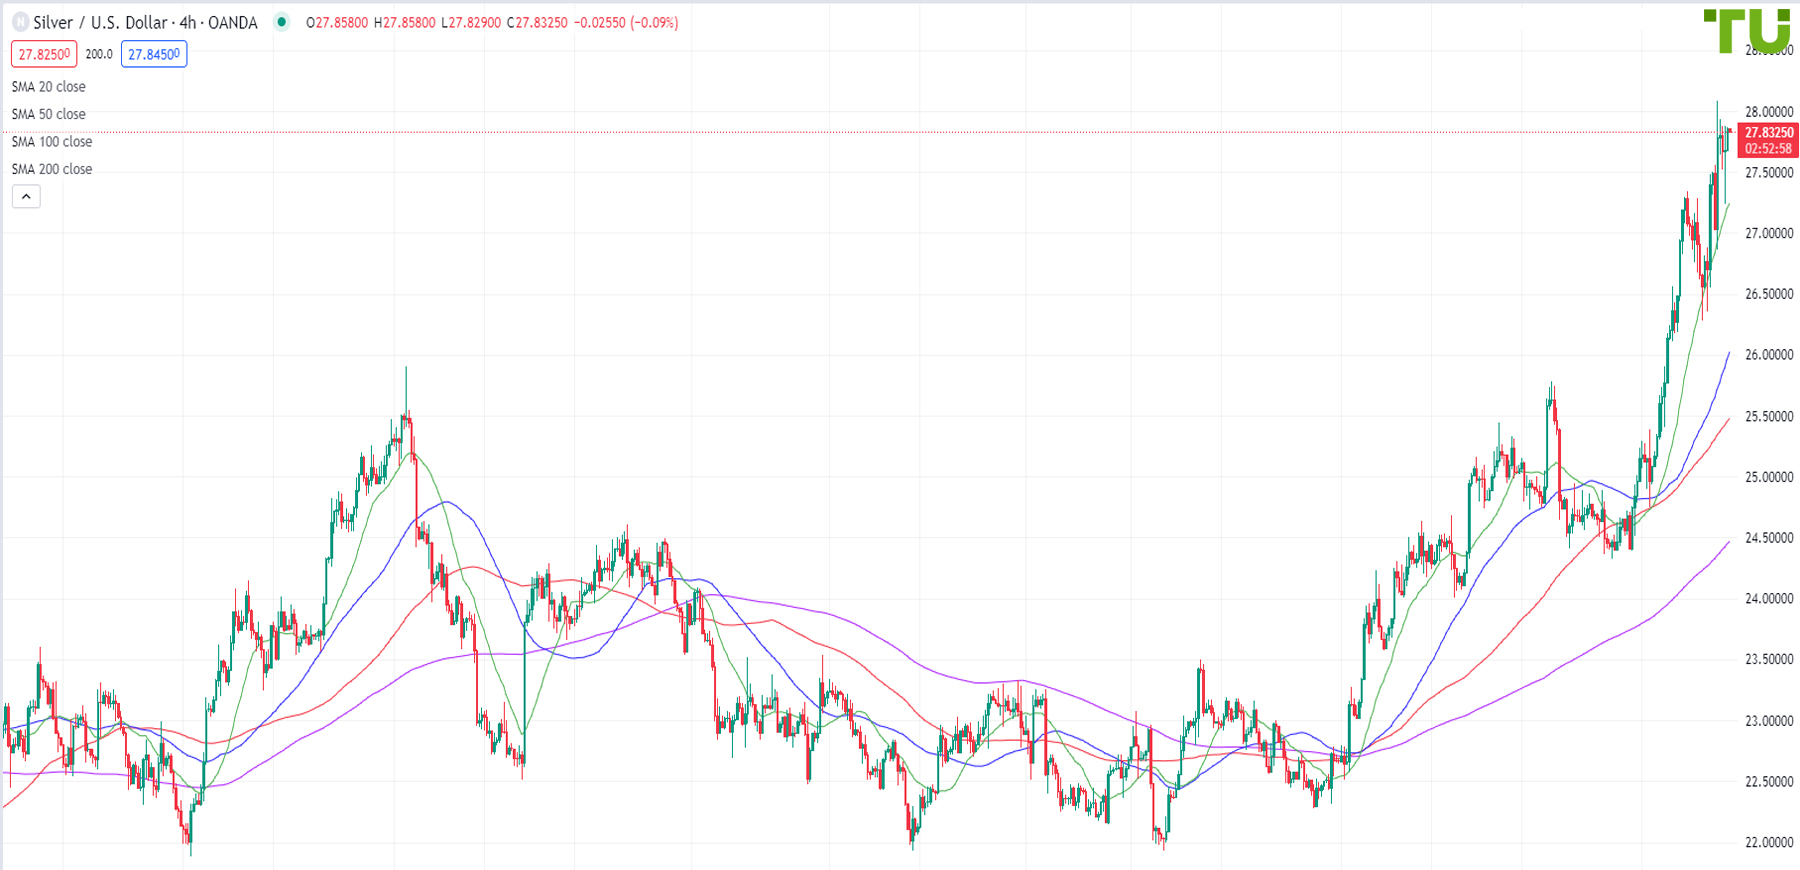 XAG/USD continue to buy on the decline